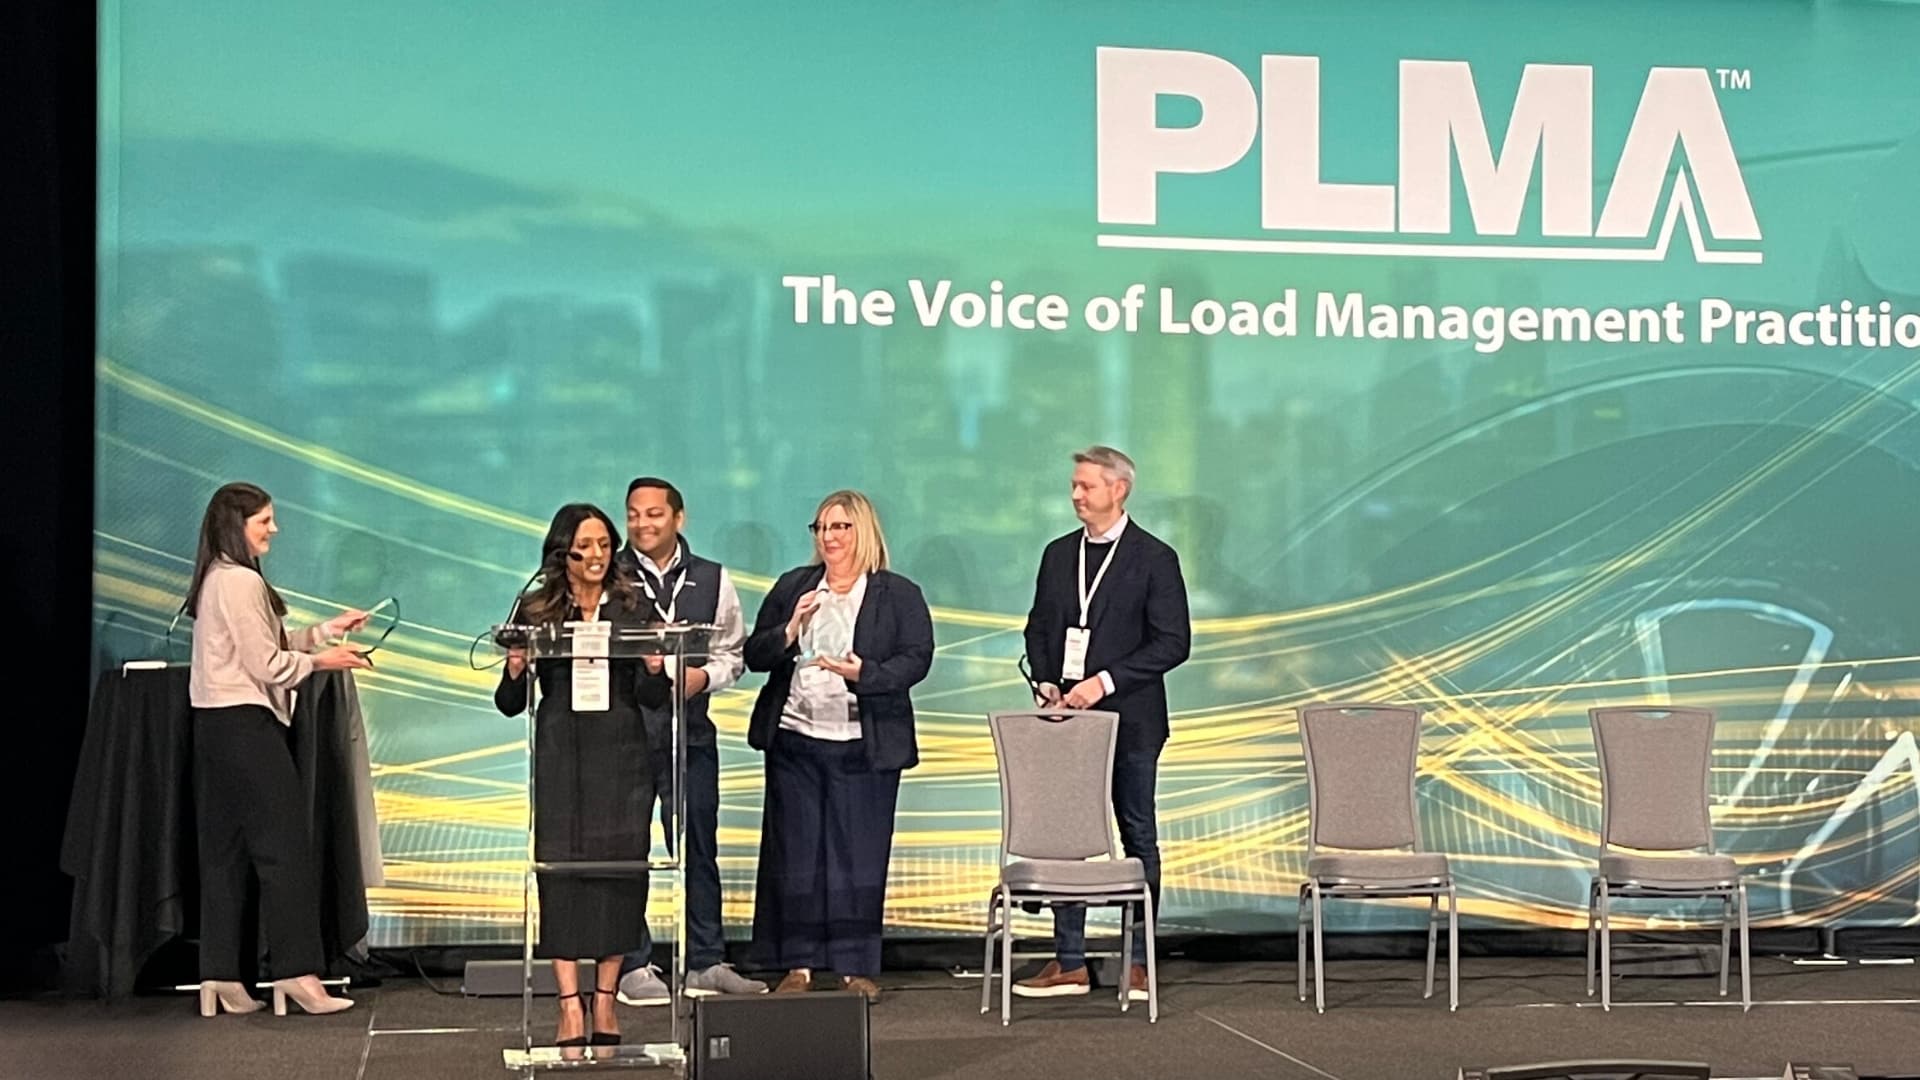 Representatives of Ontario IESO, EnergyHub, ecobee, and Oracle on stage receiving a Pacesetter Award at the 49th PLMA conference